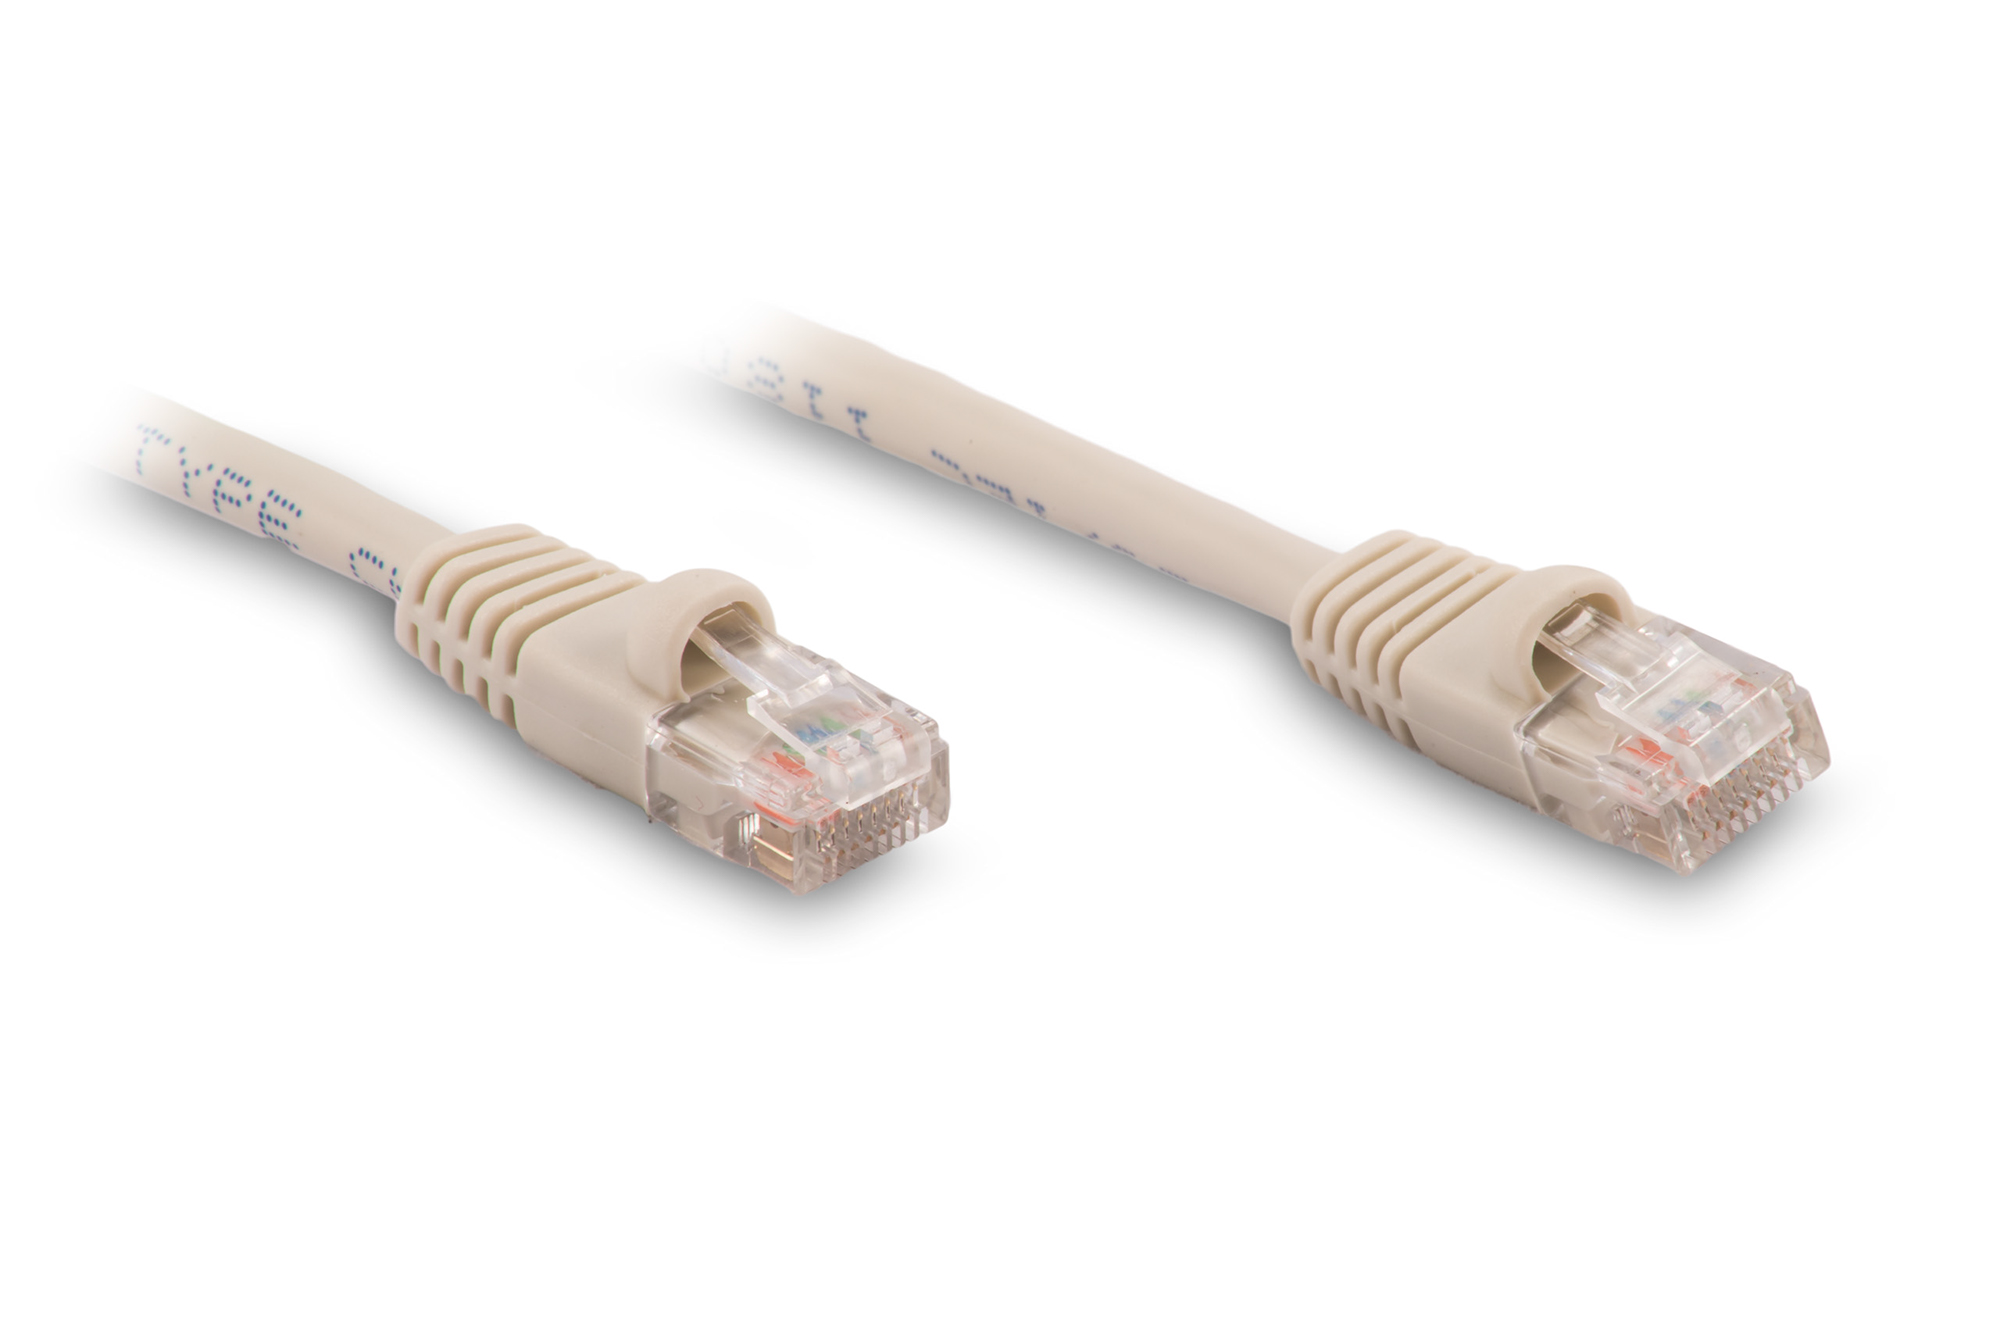 Cables.com 5-Pack Category 6 550Mhz Ethernet Network Cable White 3 Feet with Snagless Boots 